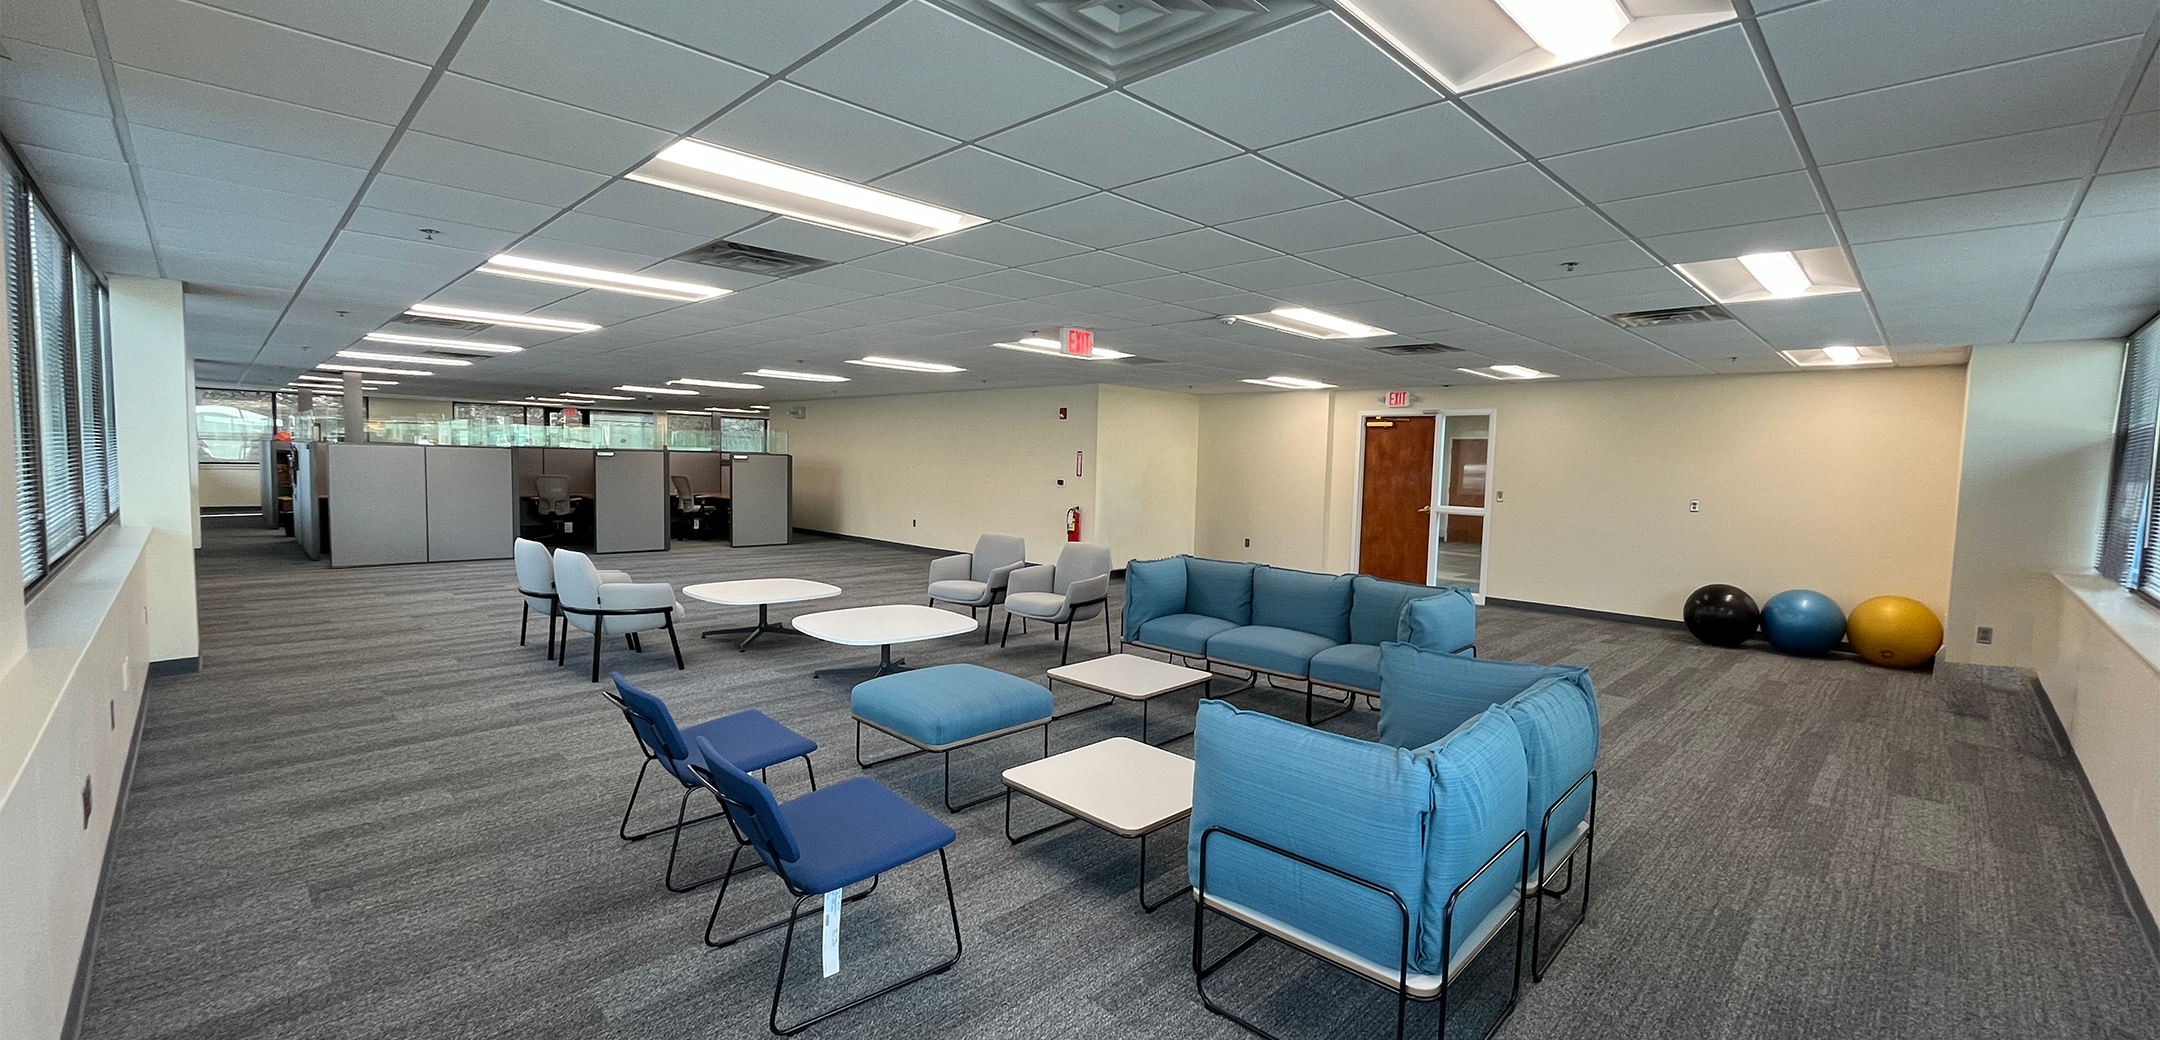 An angled interior view of the PA Leadership Charter School showcasing the rest seating area with couches and chairs and private cubicles in the background.